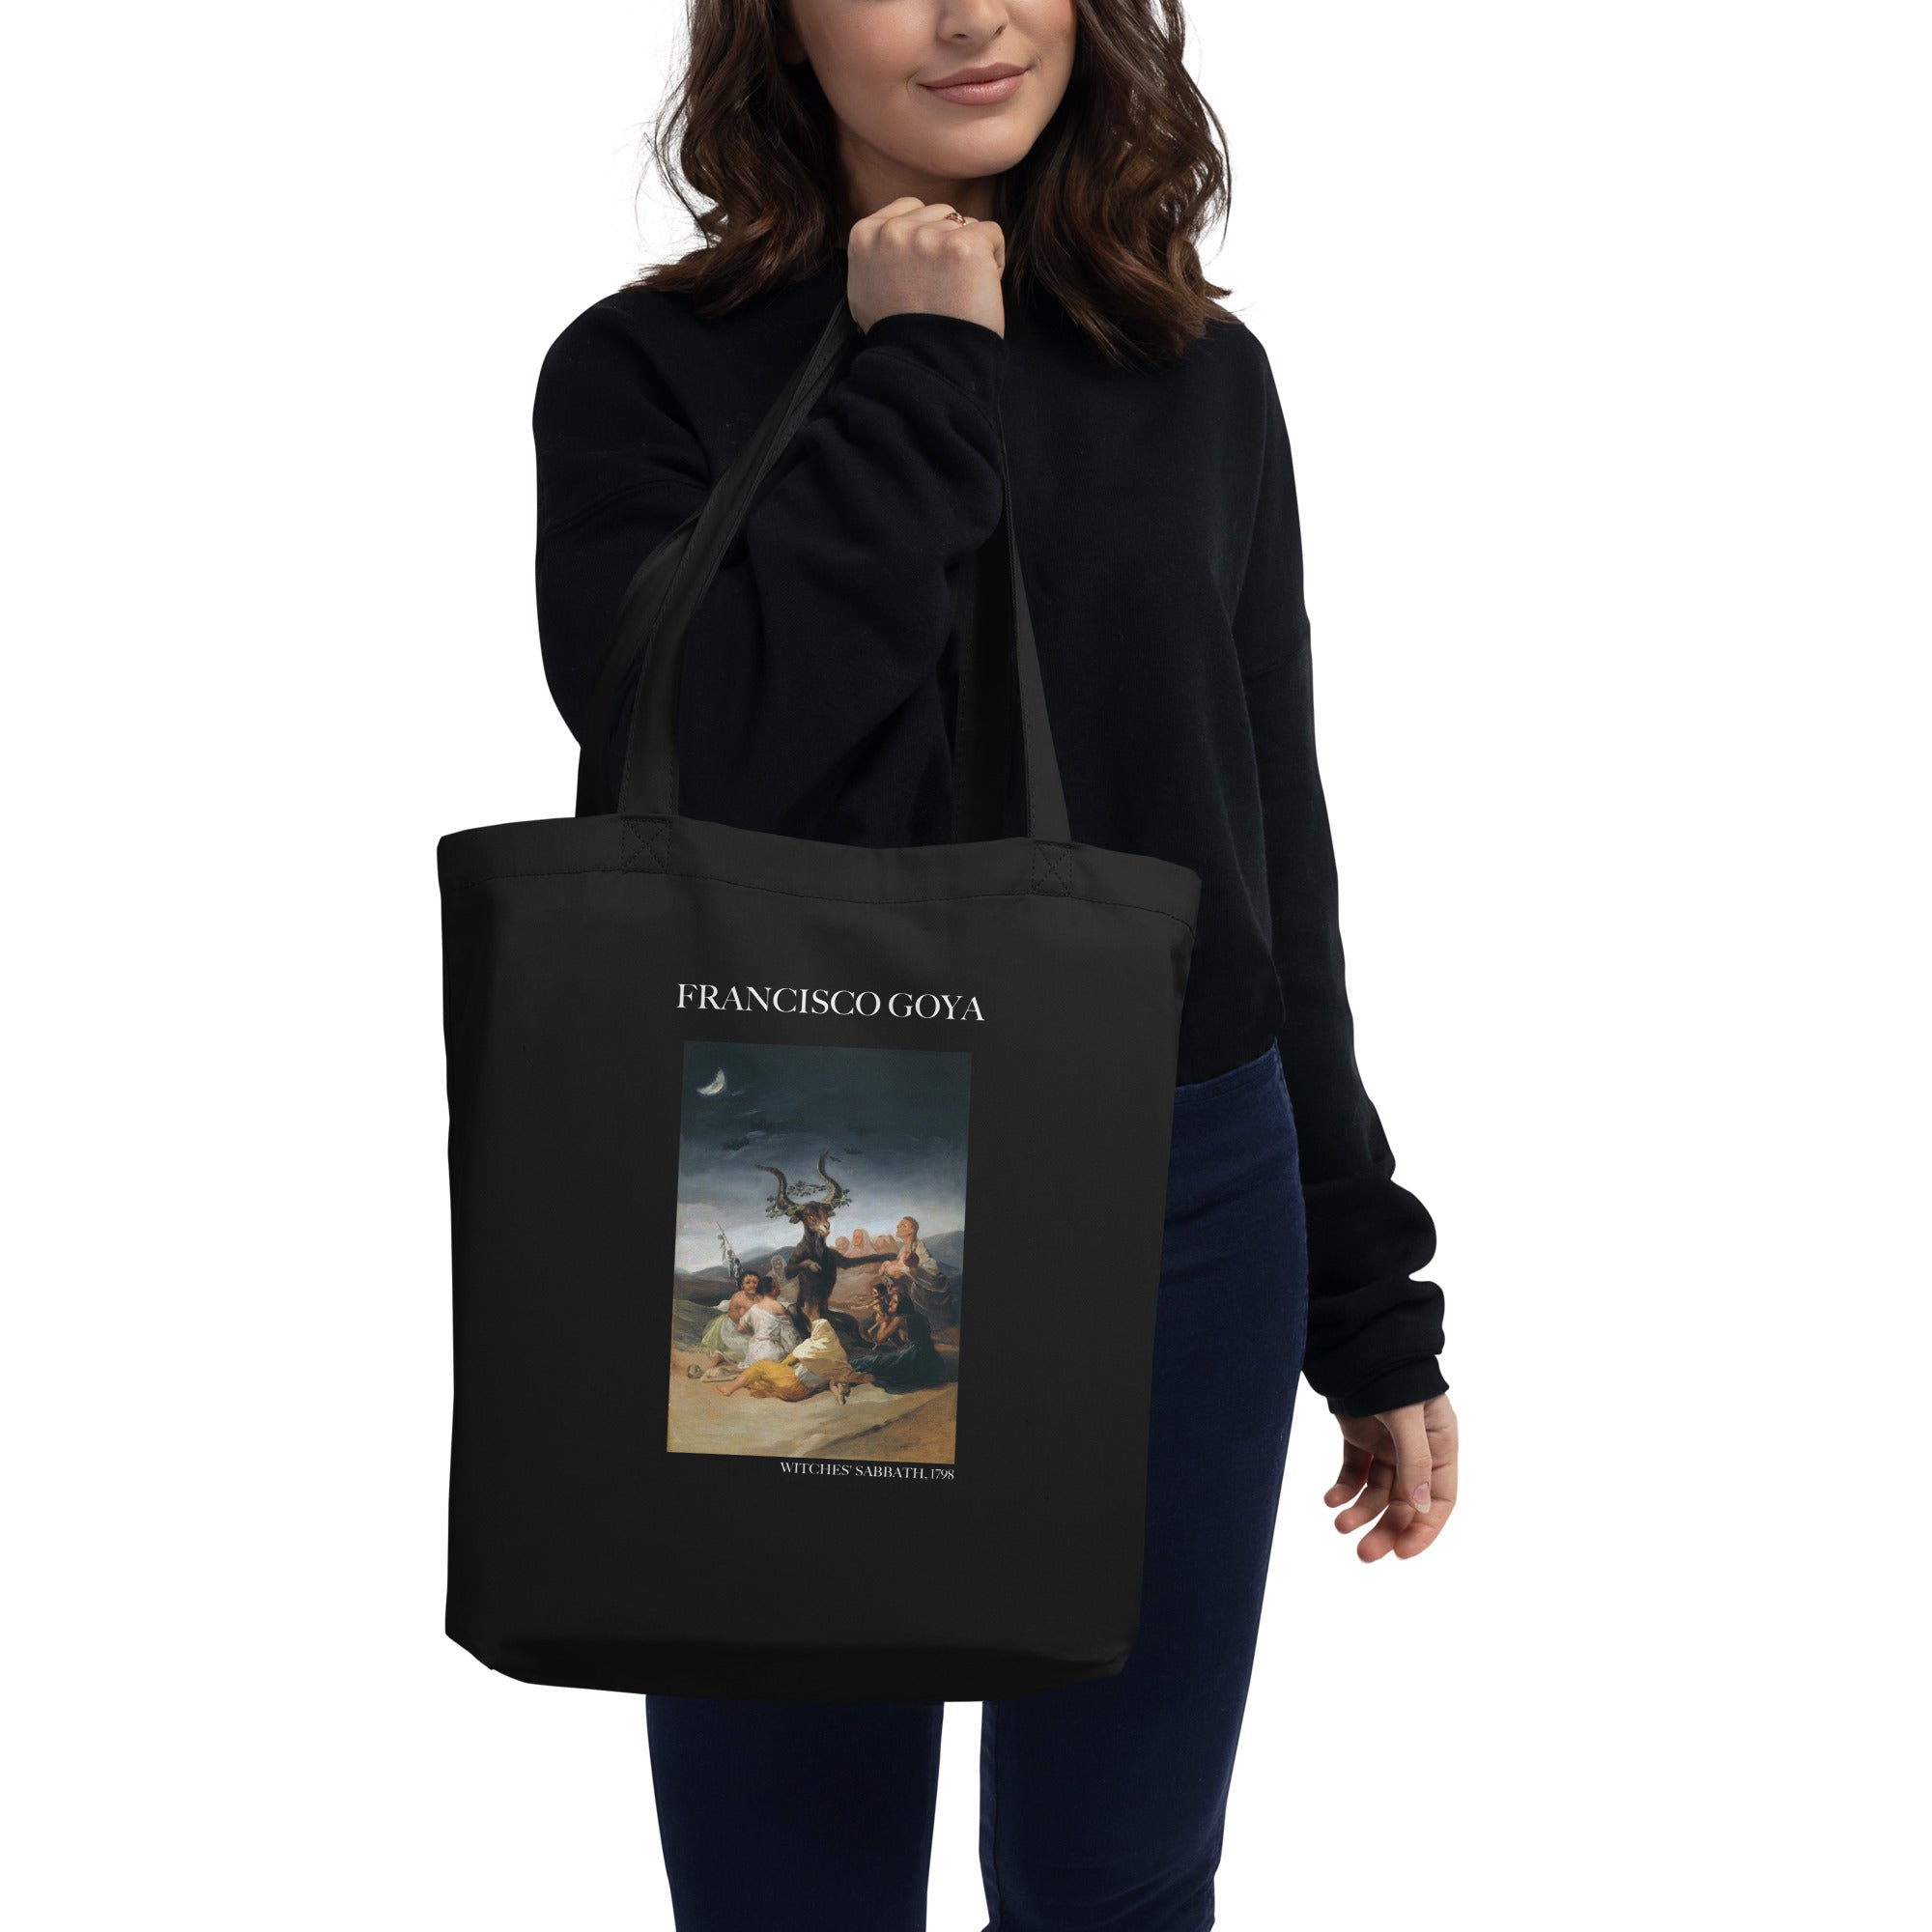 Francisco Goya 'Witches' Sabbath' Famous Painting Totebag | Eco Friendly Art Tote Bag